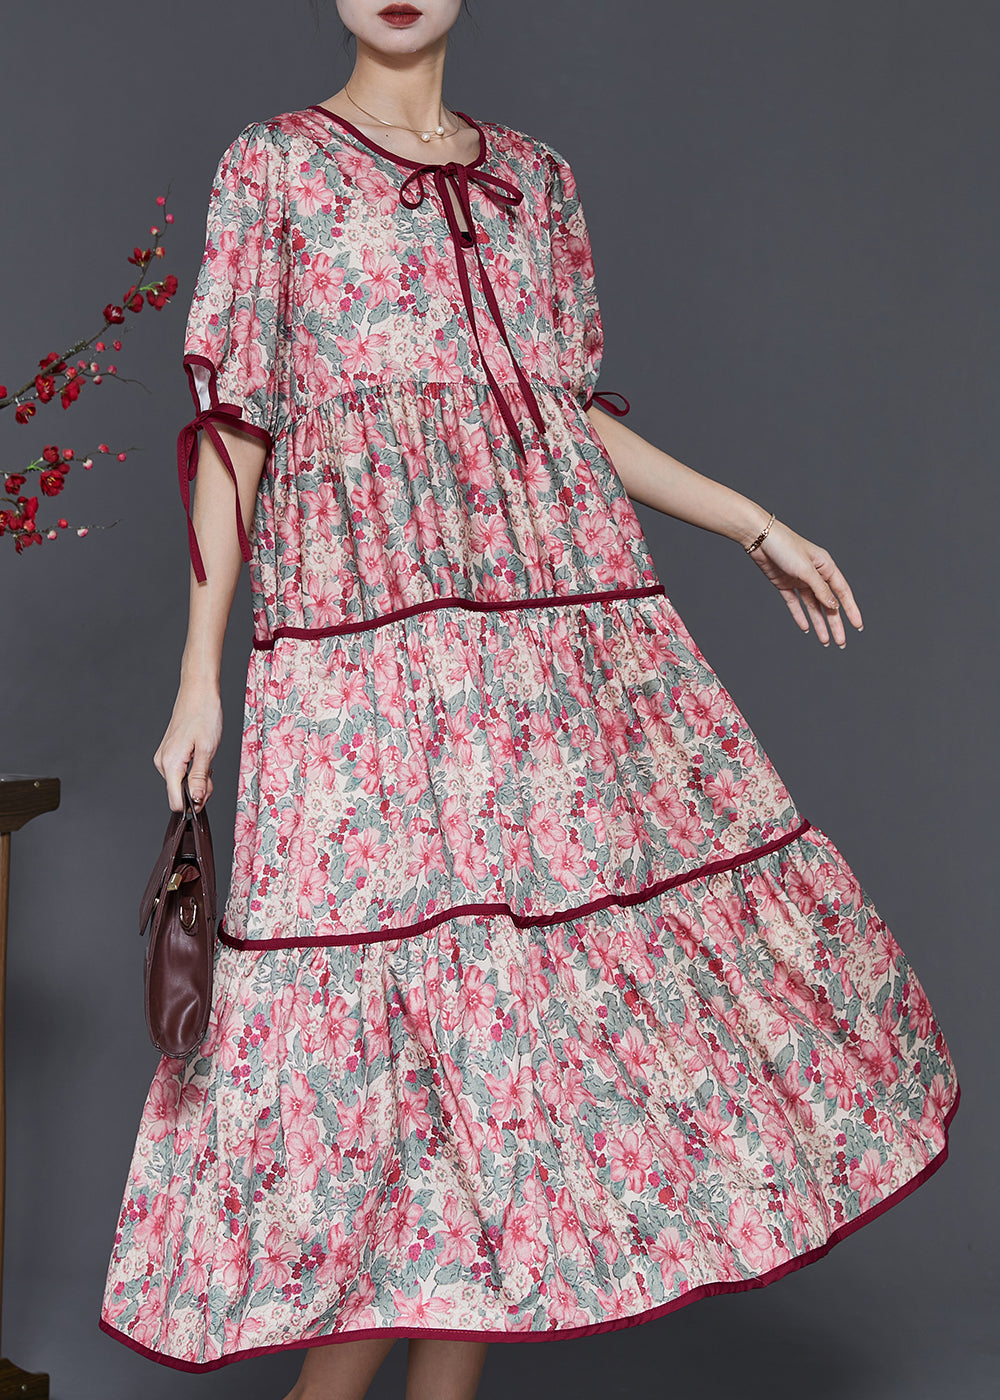 Red Print Cotton Long Dresses Lace Up Spring